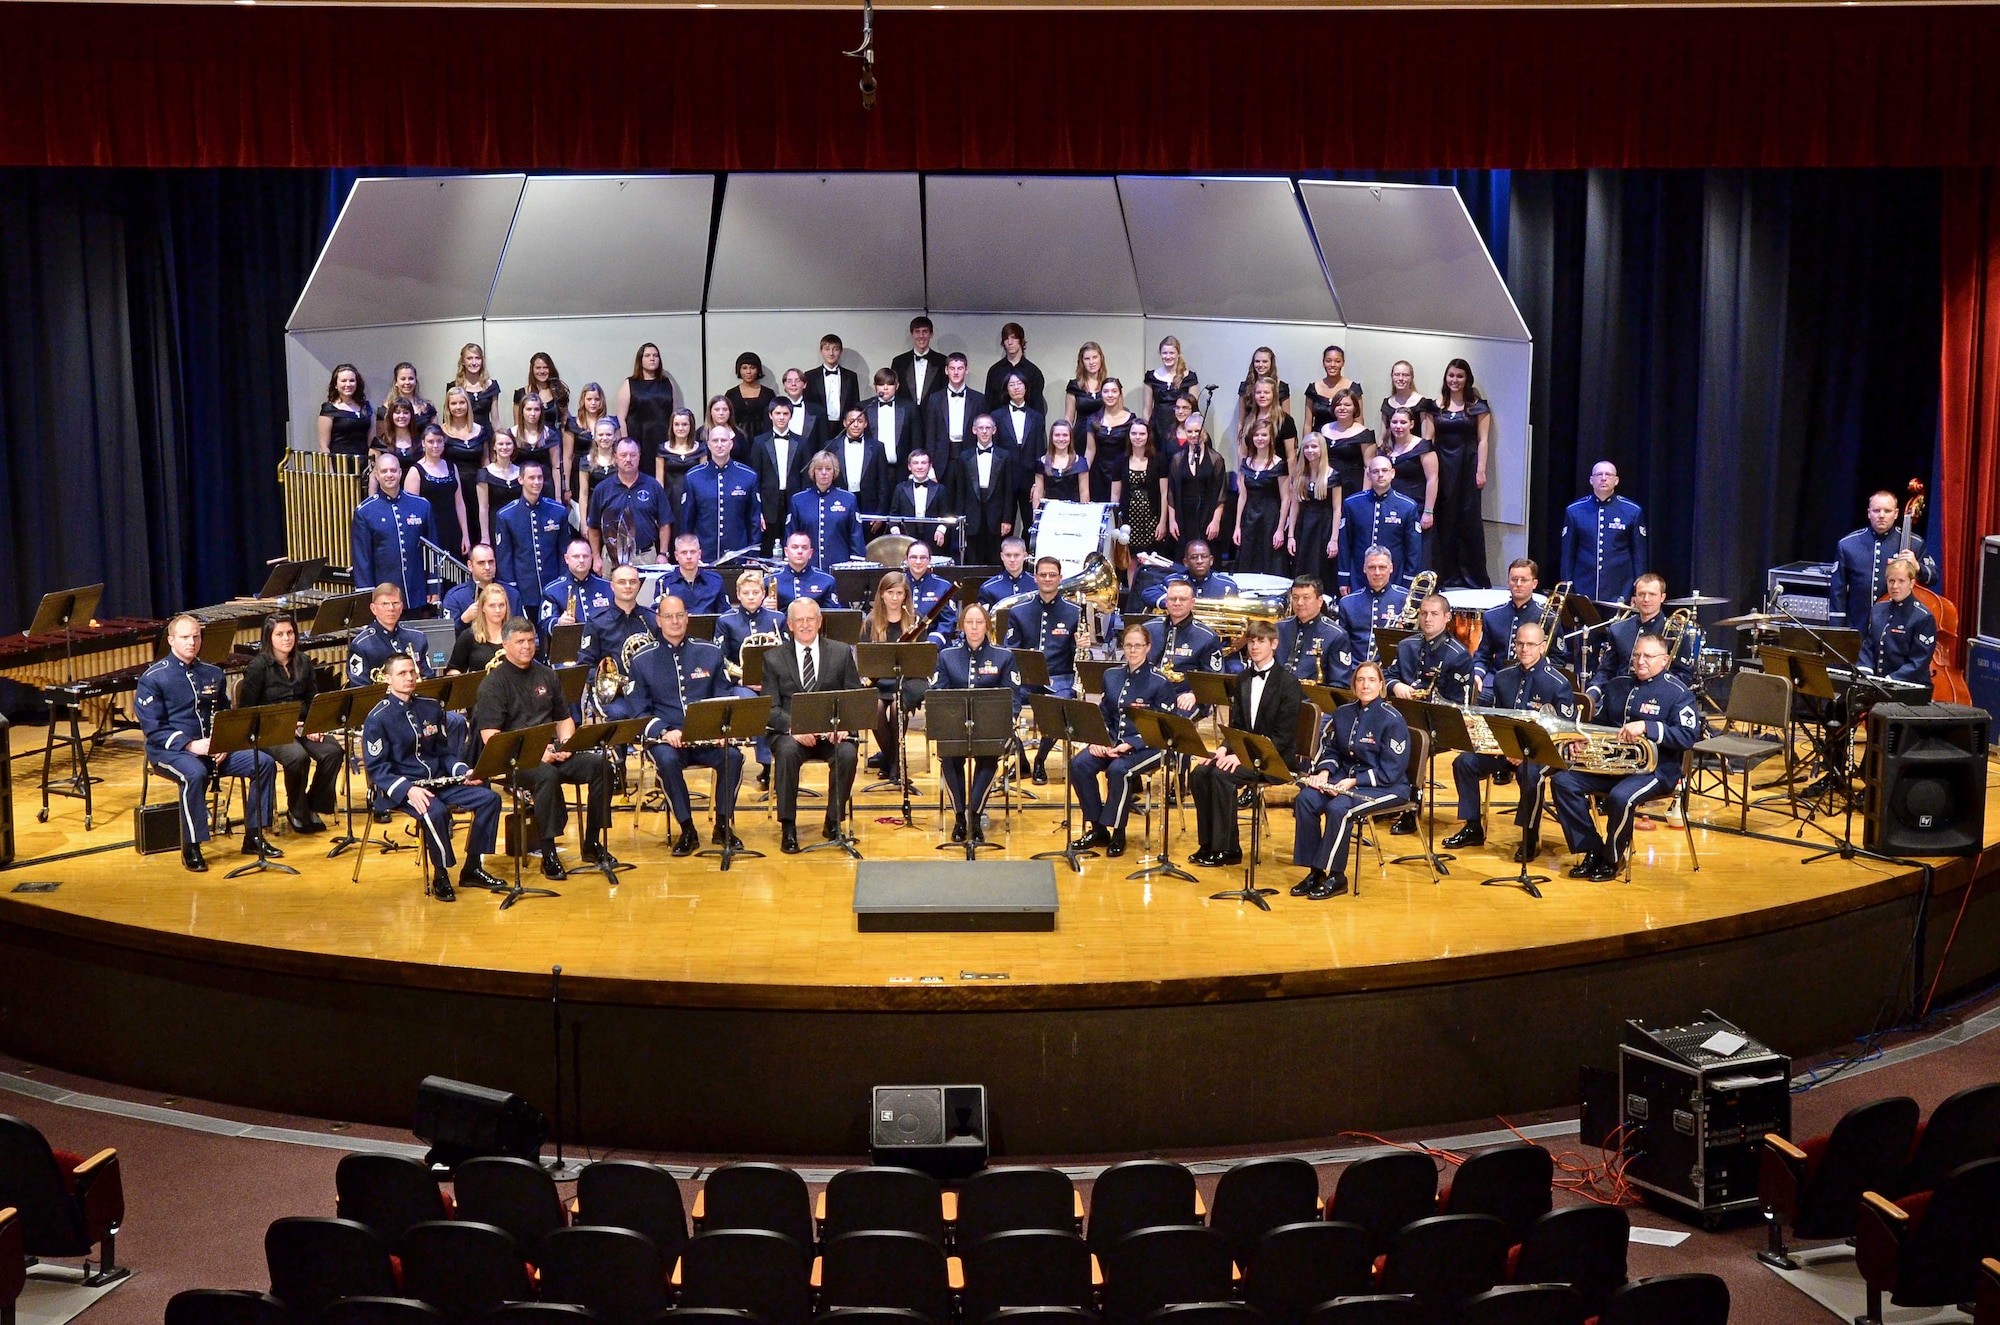 Members of The Air National Guard Band of the Northwest, also known as the 560th Air Force Band, choir students from Shadle Park and Rogers High Schools, instrumentalists from Coeur D’Alene High School, Eastern Washington University and 560th alumni, pose for a photo before performing a musical “Salute to Veterans” honoring military members past and present in anticipation of Veteran’s Day at Spokane Falls Community College.  (U.S. Air Force photo/Staff Sgt. Anthony Ennamorato)